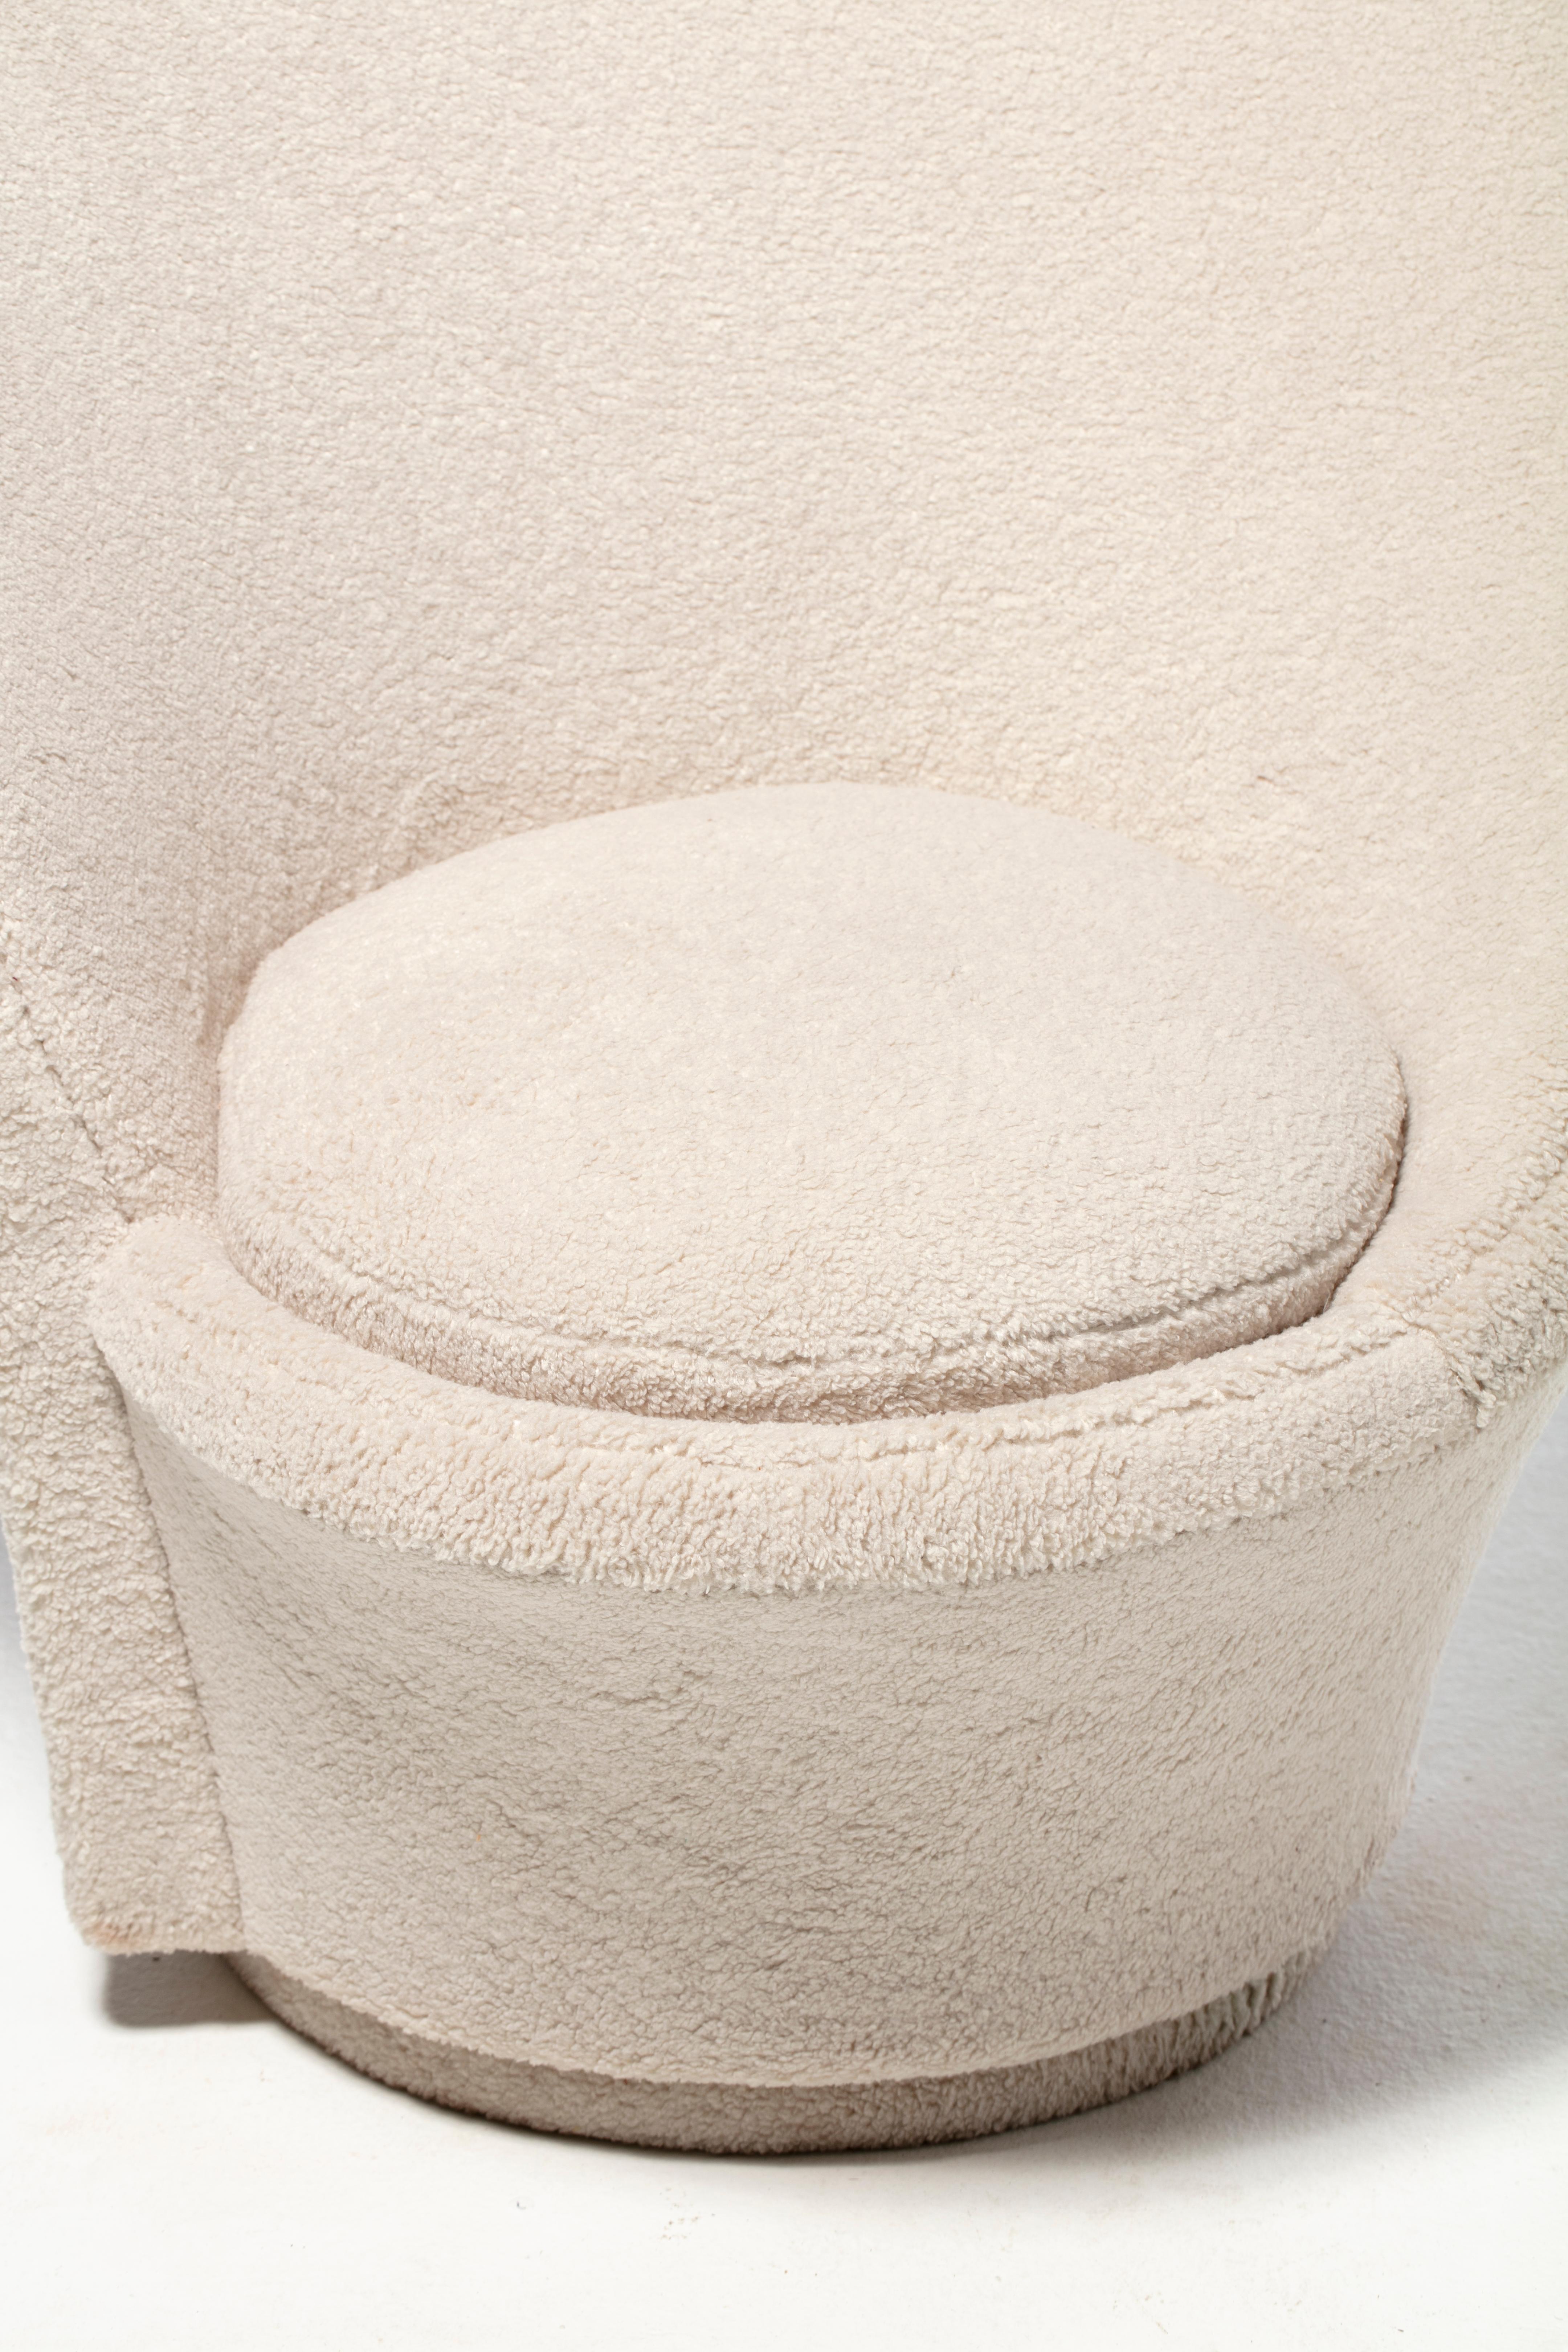 Vladimir Kagan Sculptural High Back Swivel Chairs in Textured Ivory Fabric For Sale 8